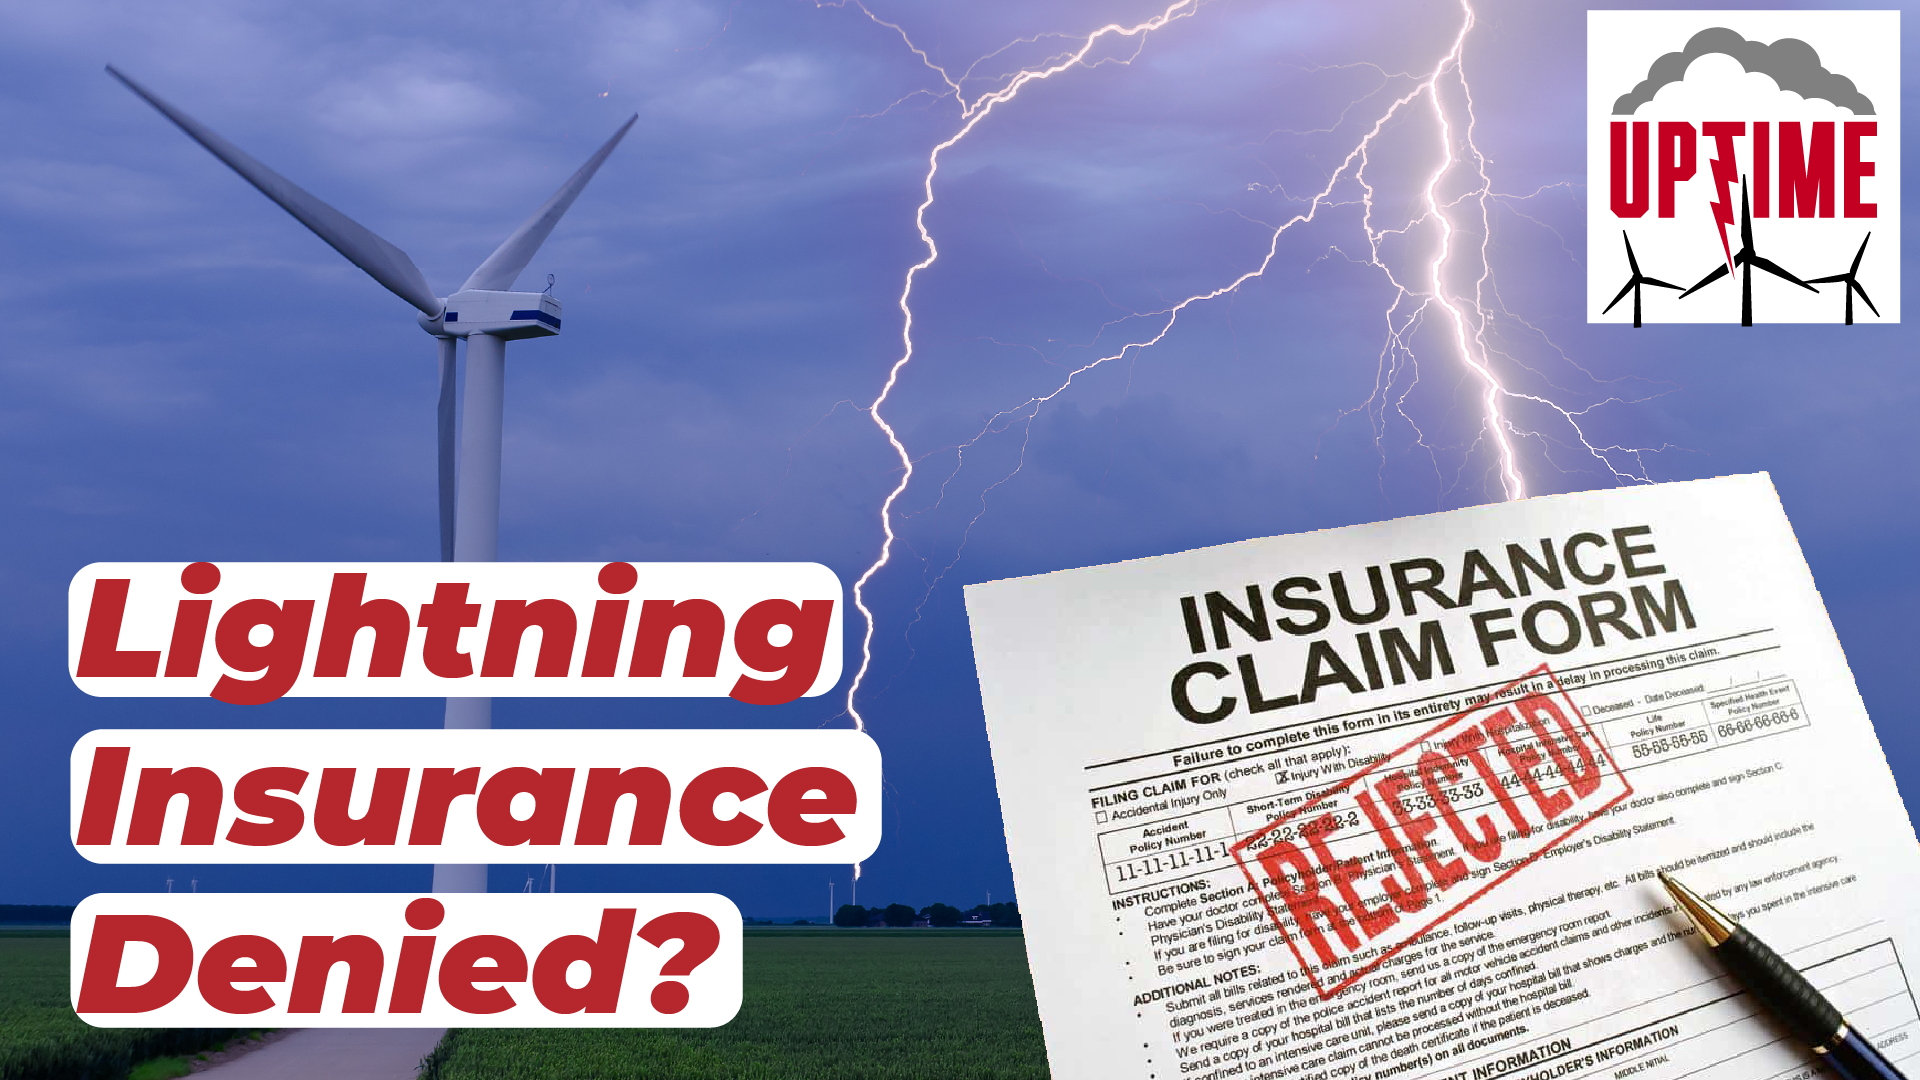 A Risky Investment - Lightning Insurance For Wind Turbines